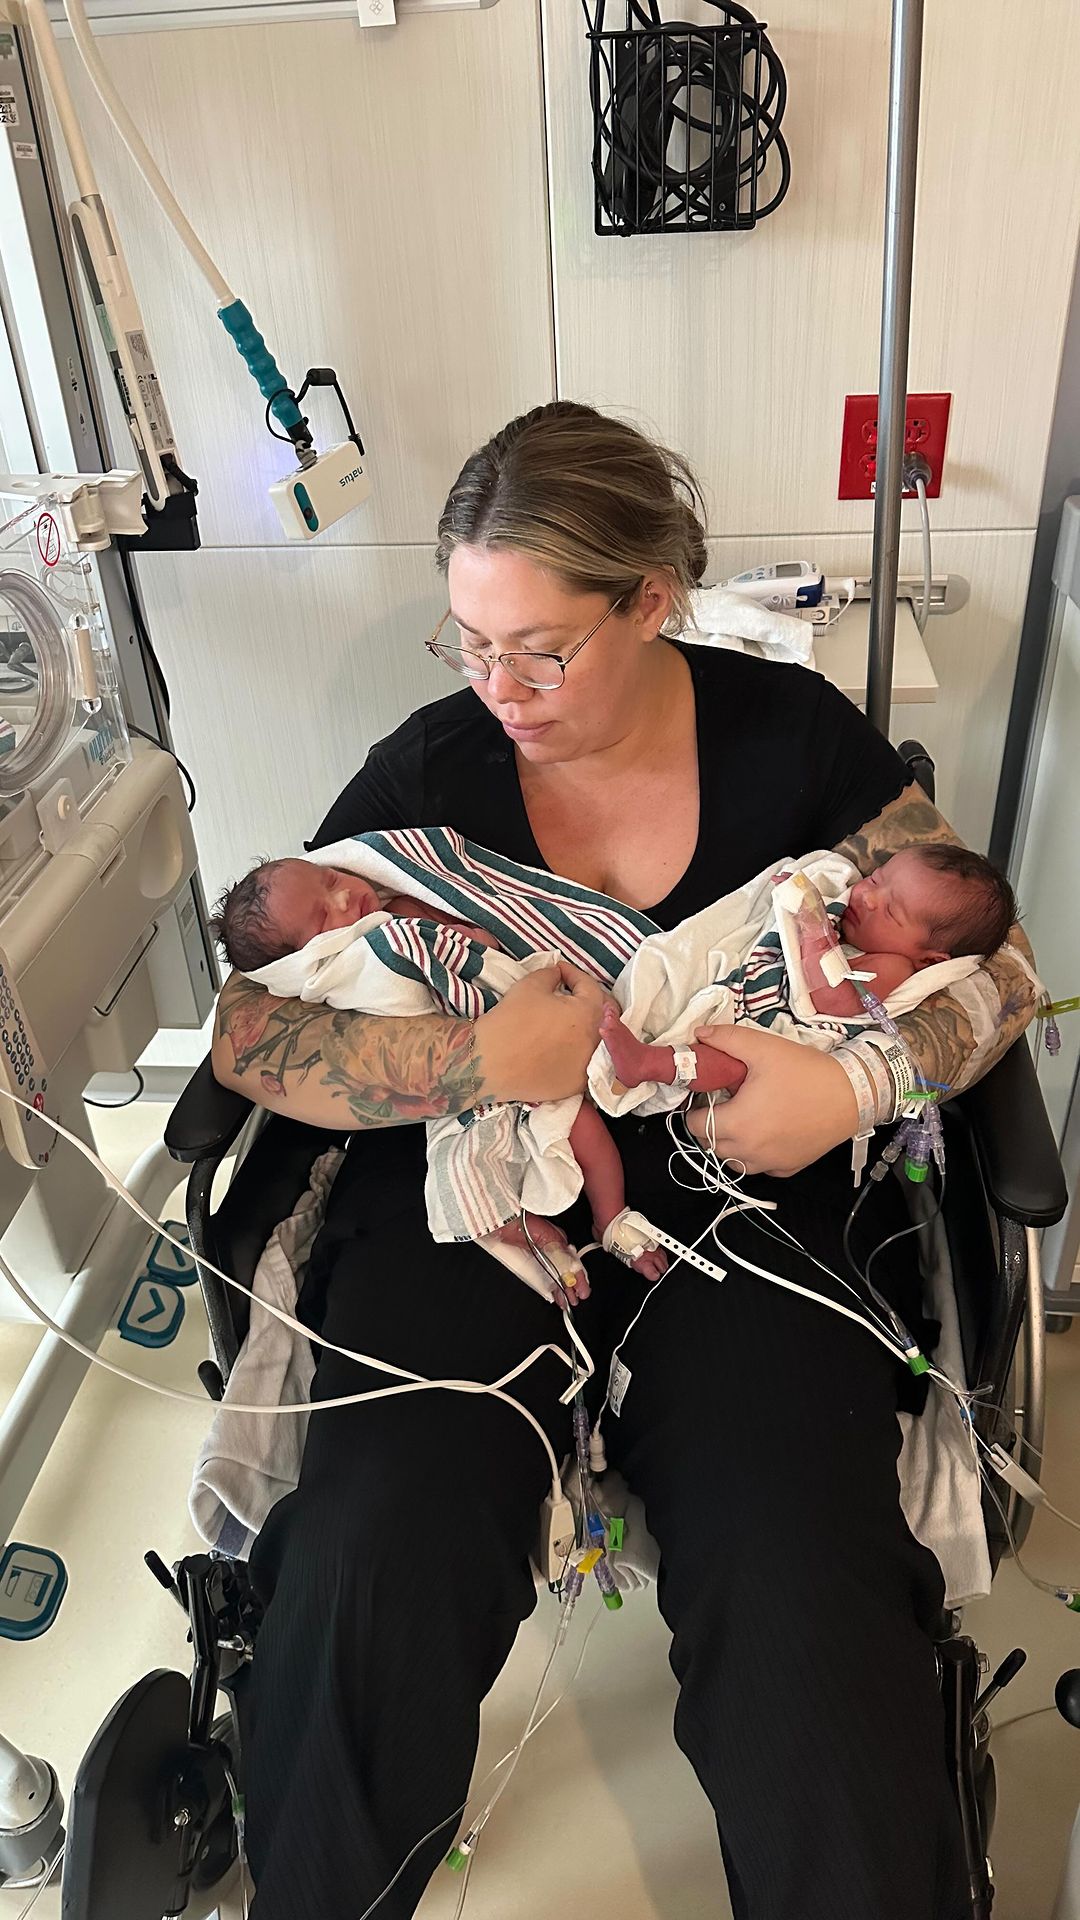 Kailyn welcomed twins in November